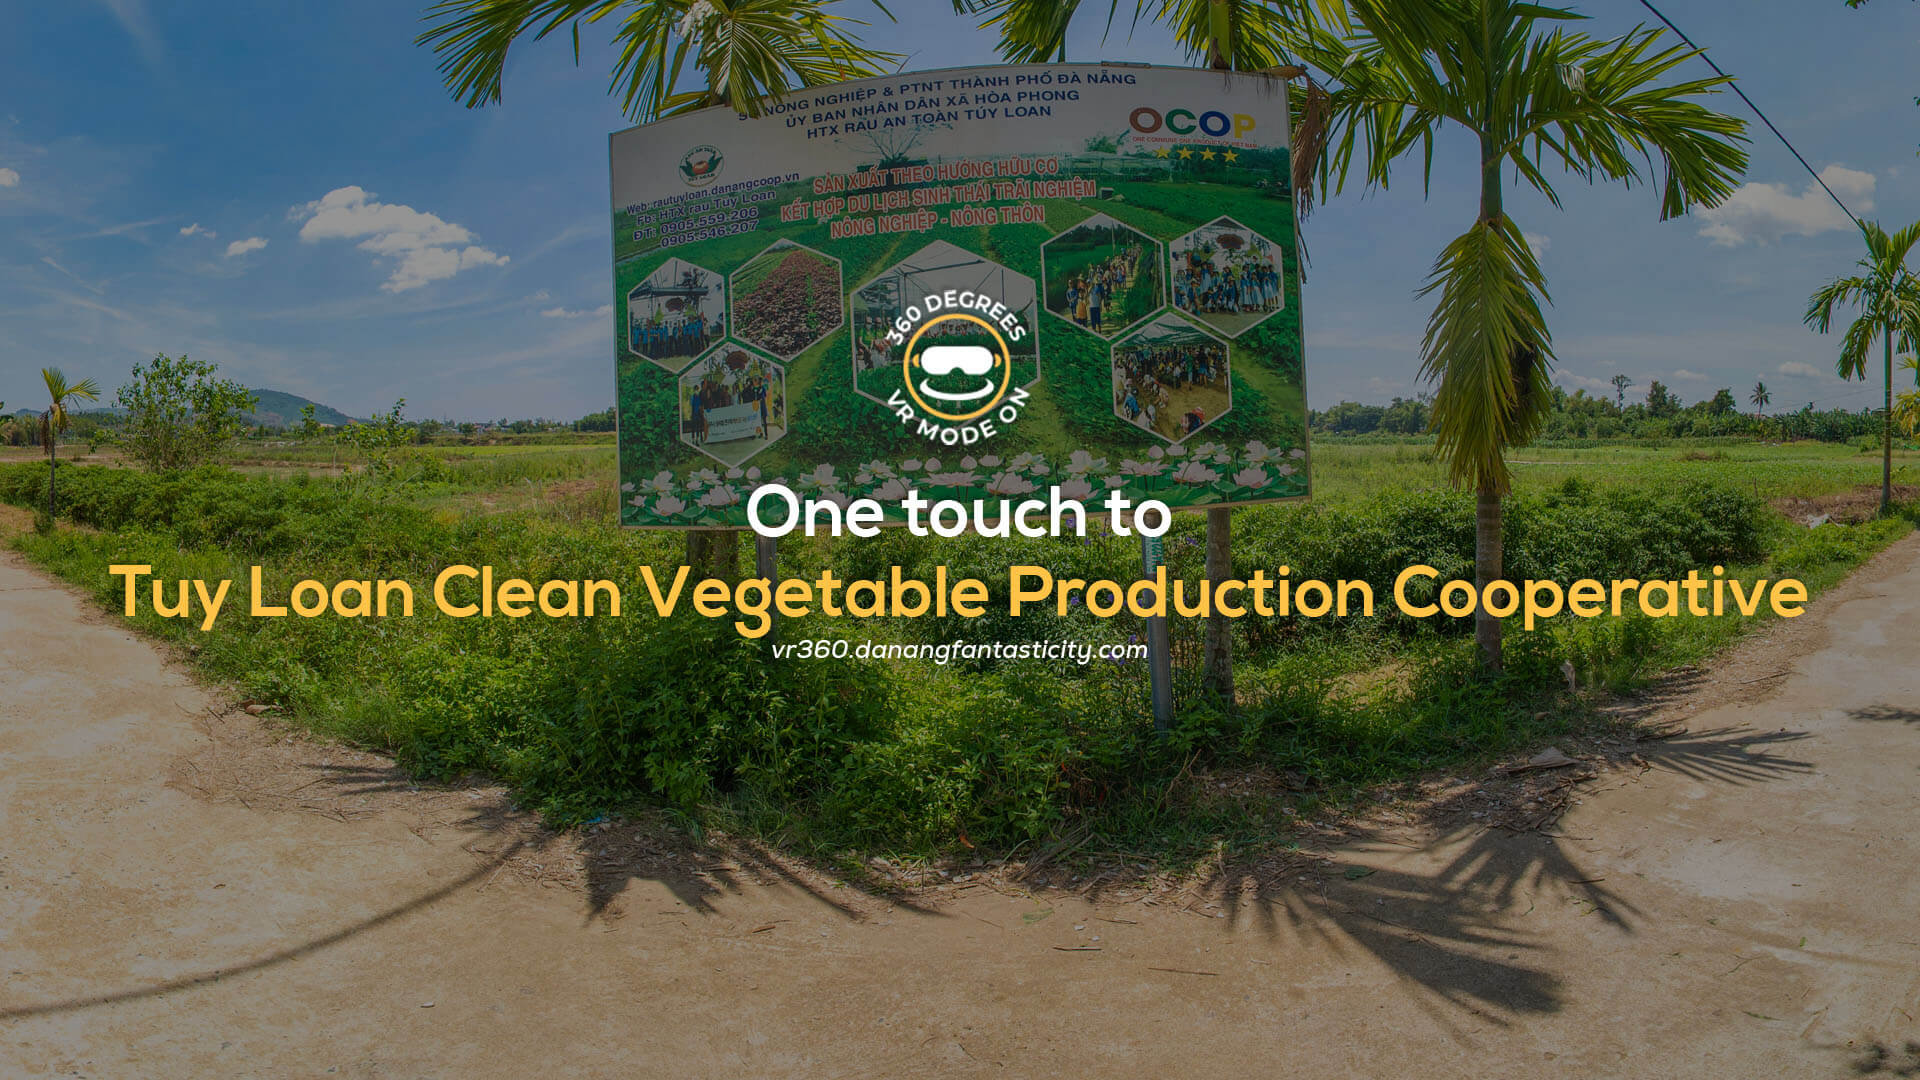 Tuy Loan Clean Vegetable Production Cooperative